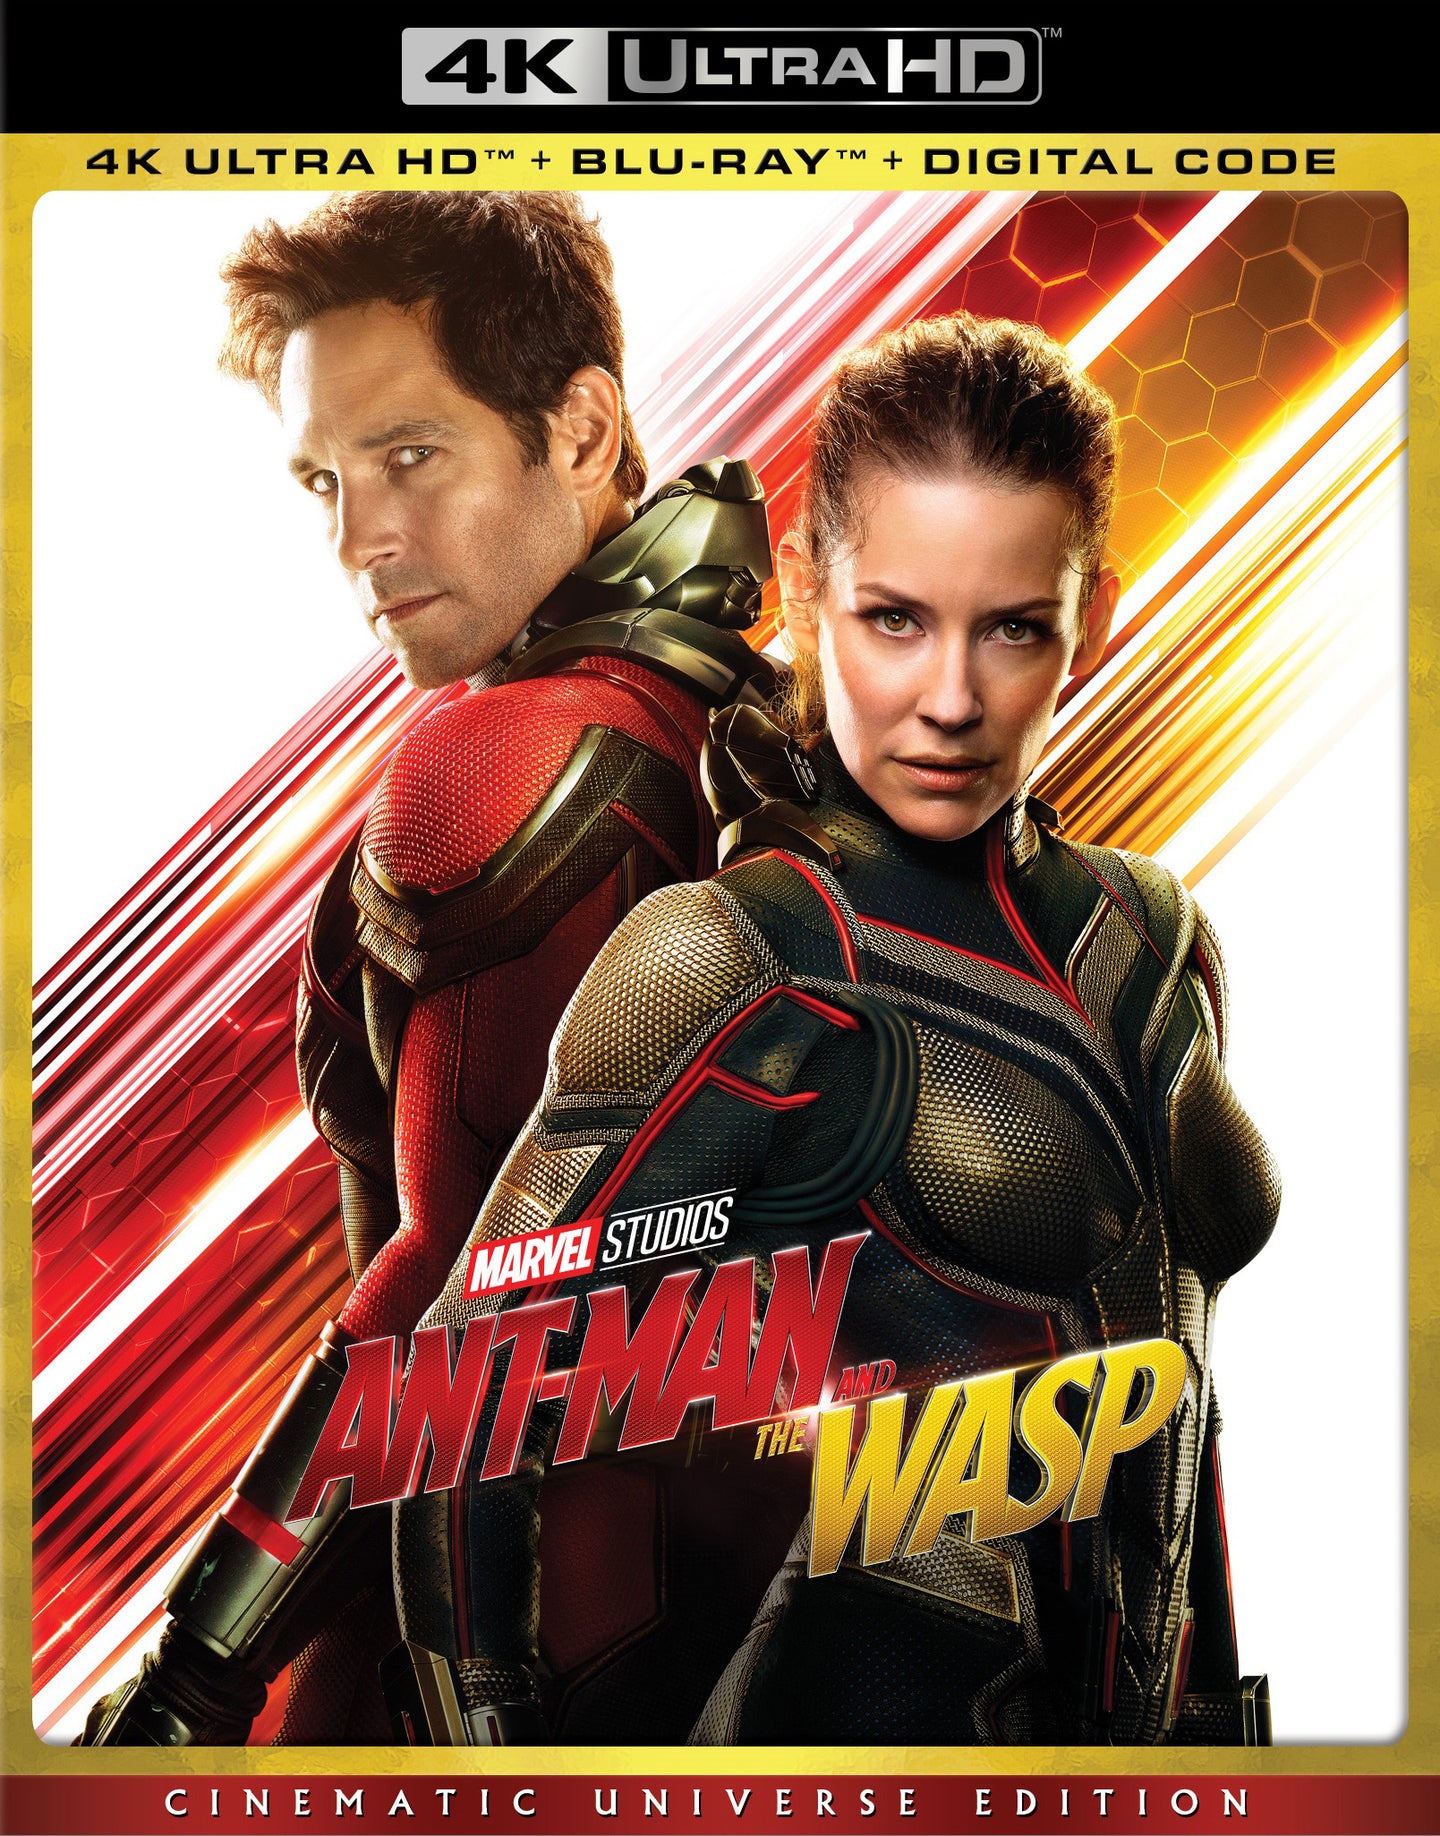 Ant-Man And The Wasp (2018) Vudu or Movies Anywhere 4K redemption only